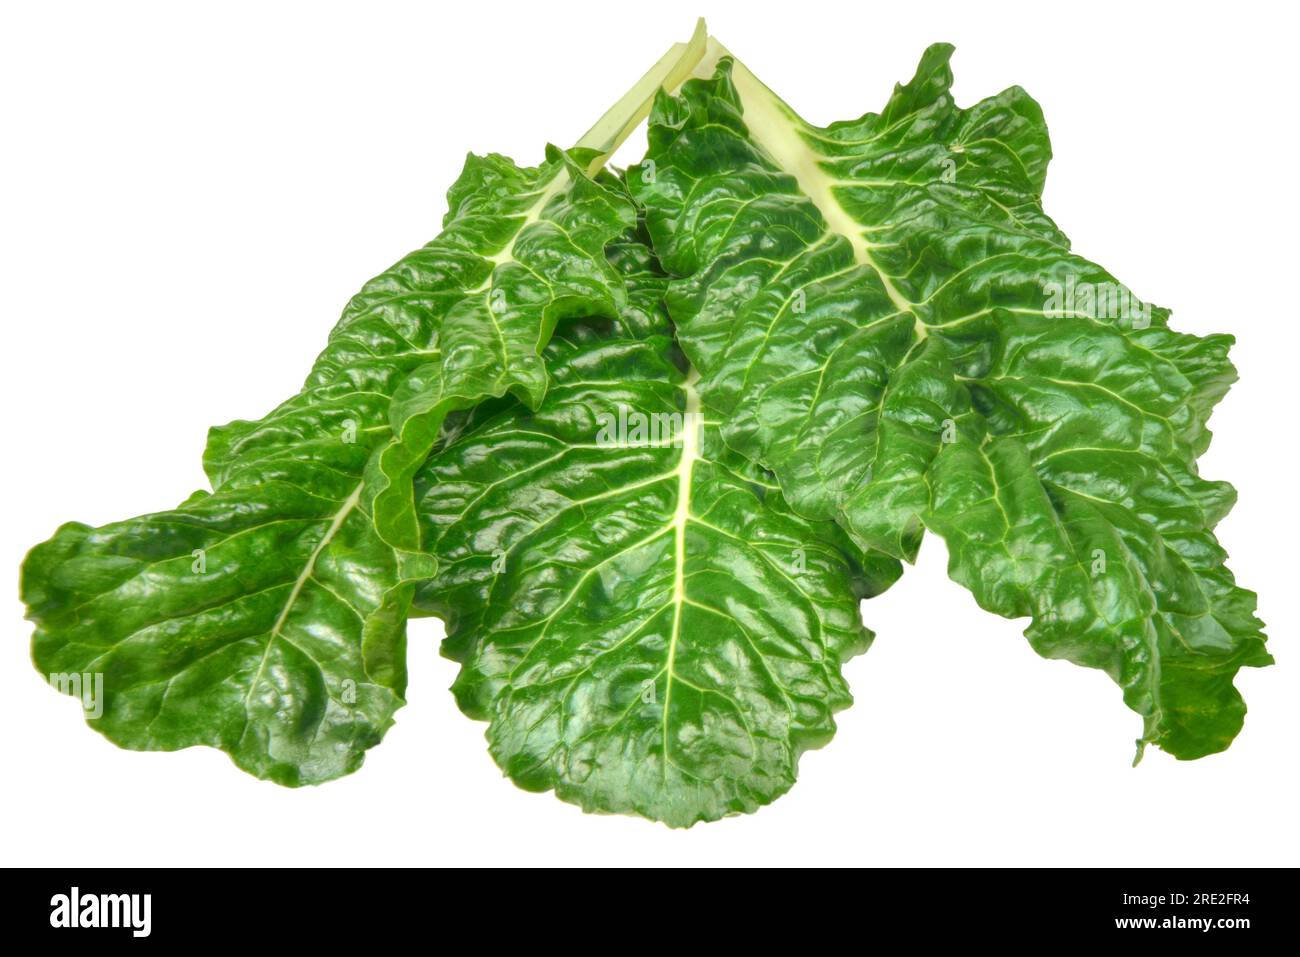 Swiss chard (Beta vulgaris) leafy green vegetable leaves on a white background. Stock Photo